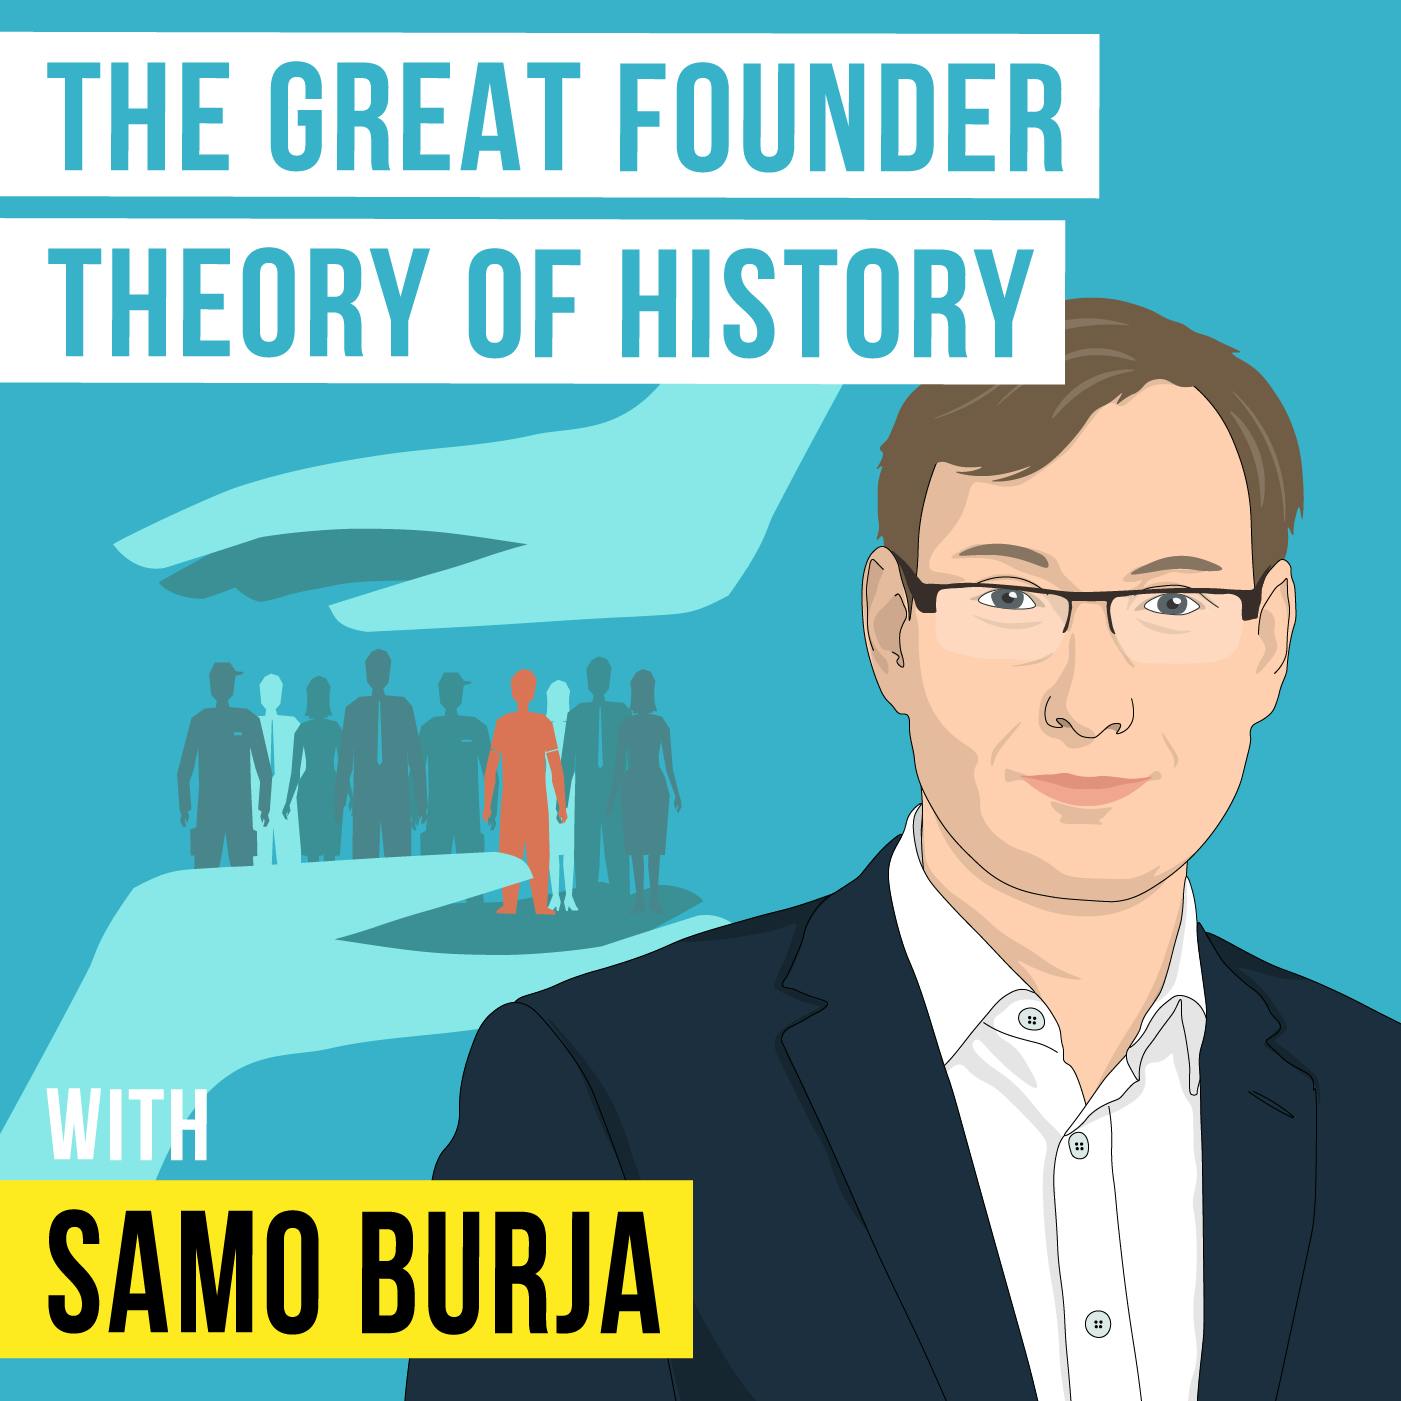 Samo Burja - The Great Founder Theory of History - [Invest Like the Best, EP.339]